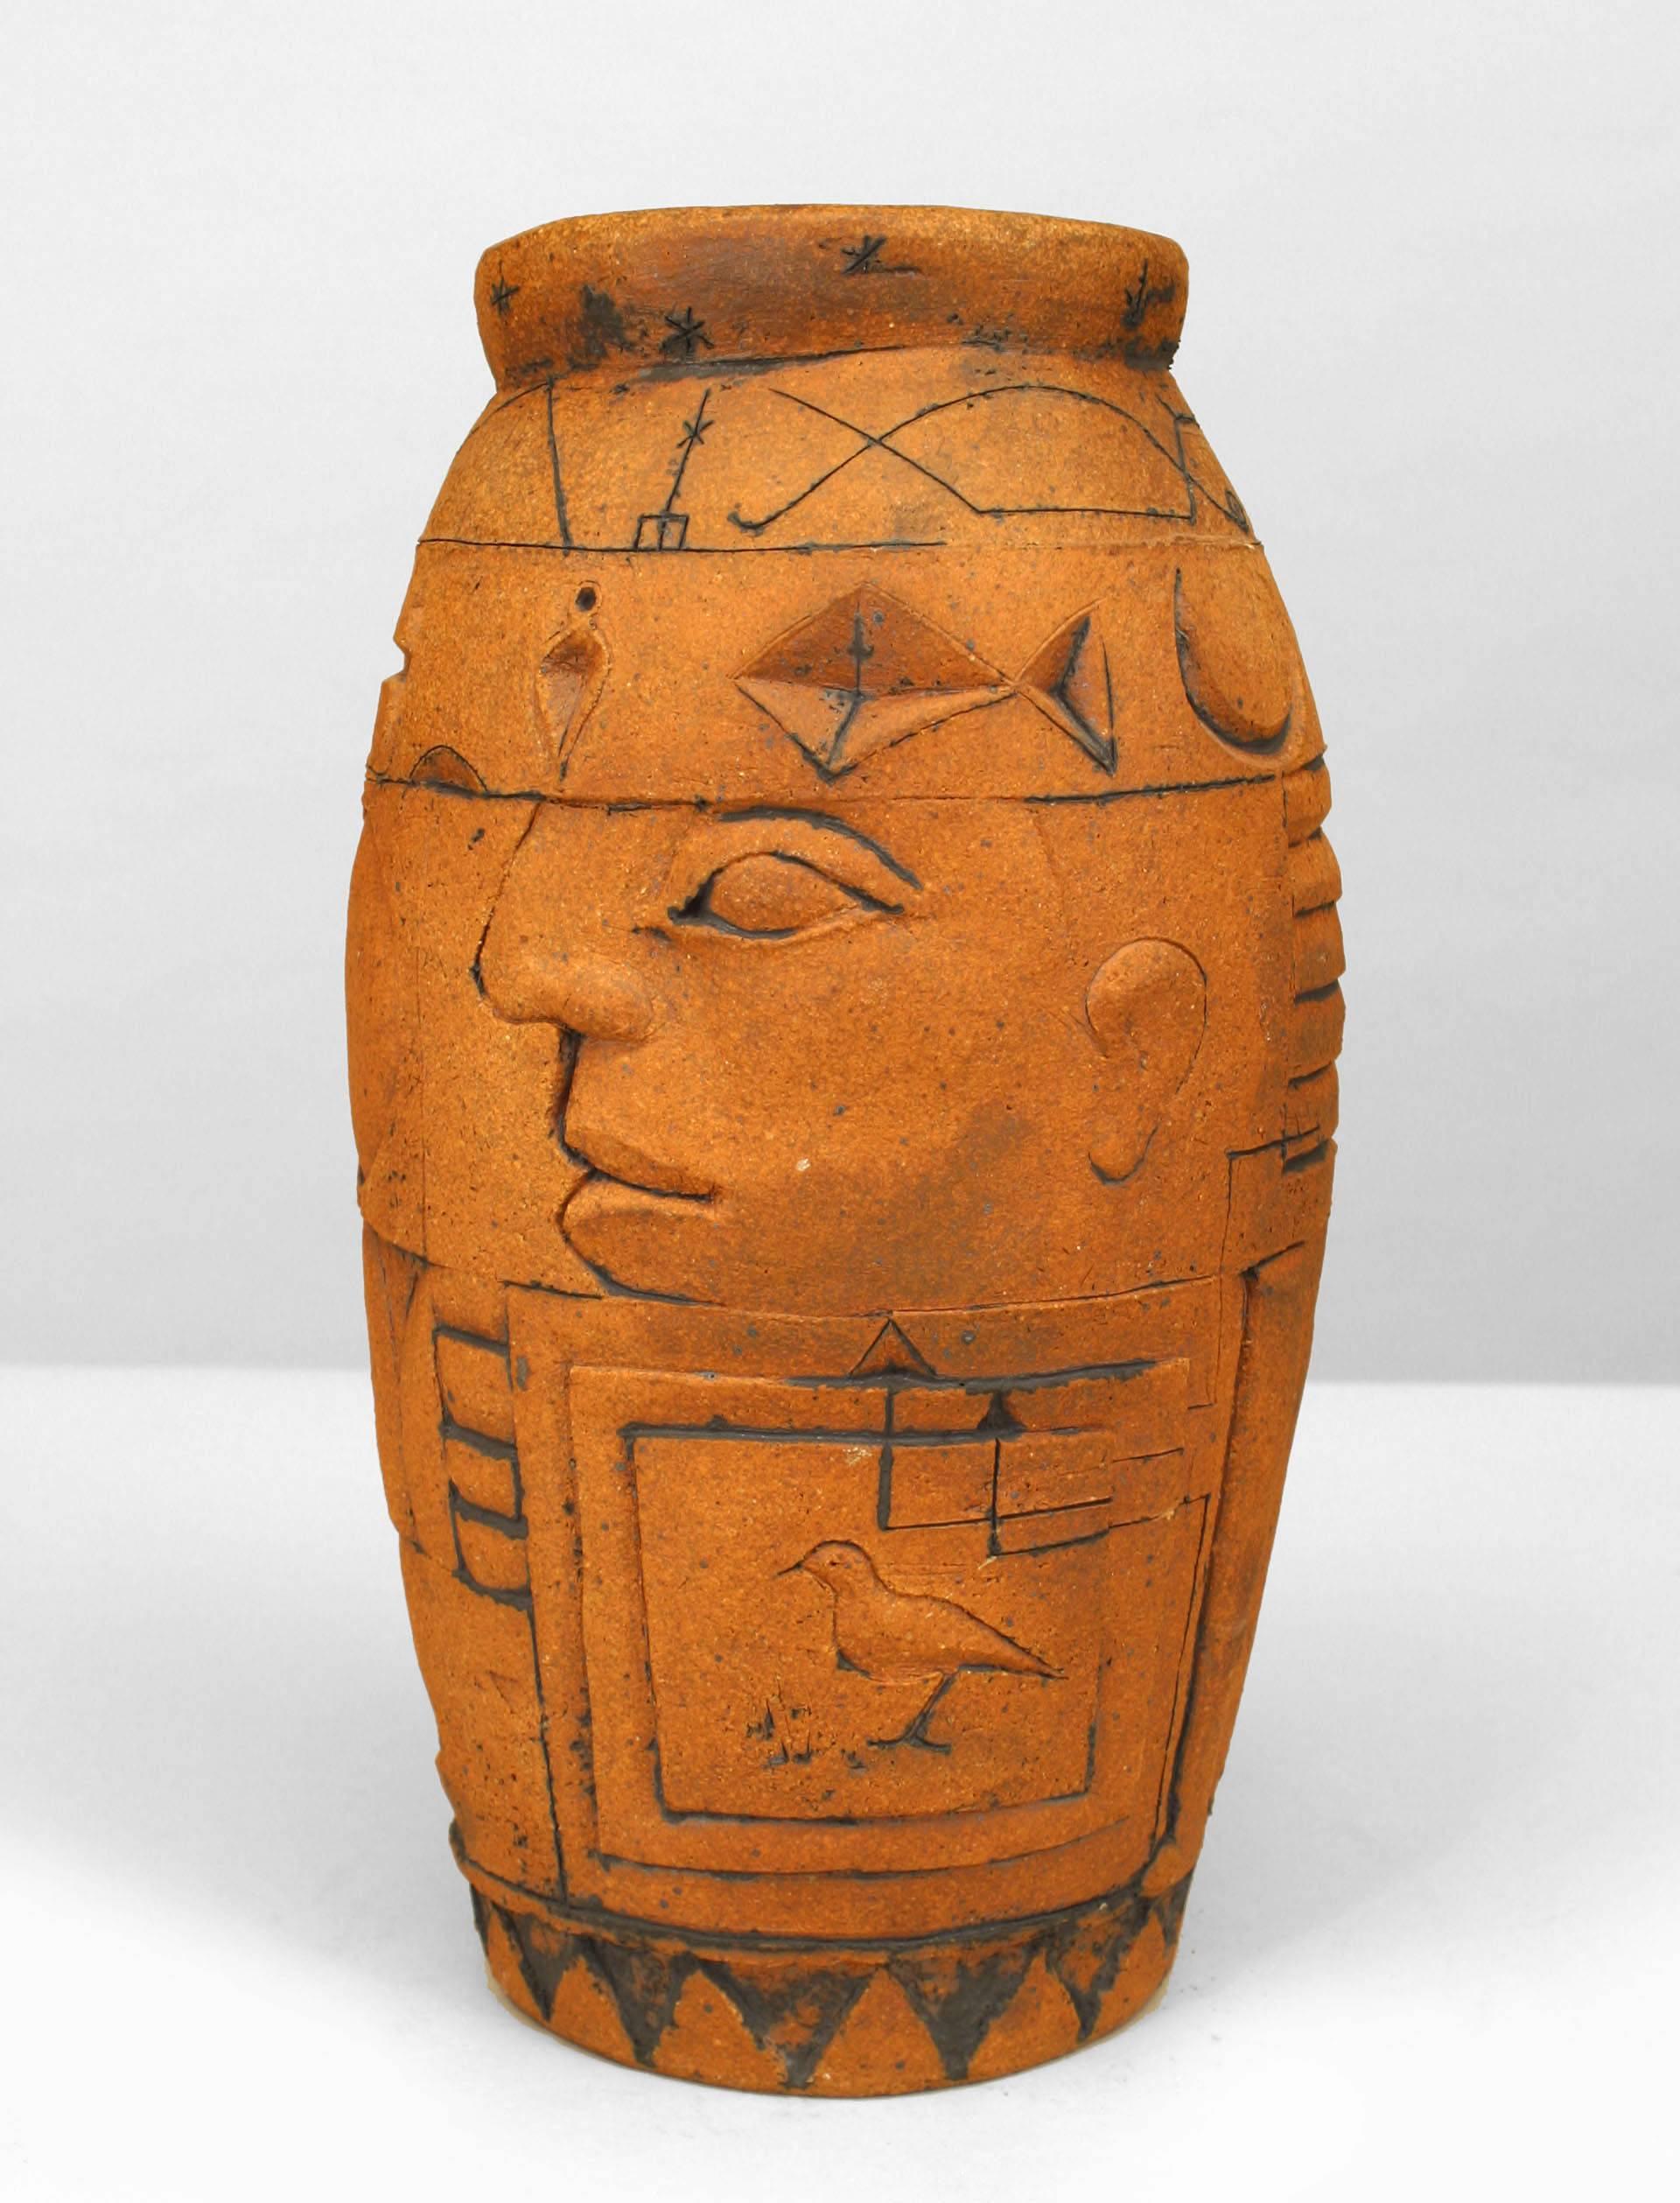 American Post-War Design terra cotta Egyptian design vase with hieroglyphics in carved relief with faces, symbols and birds (signed by ROBERT BENTLEY)
